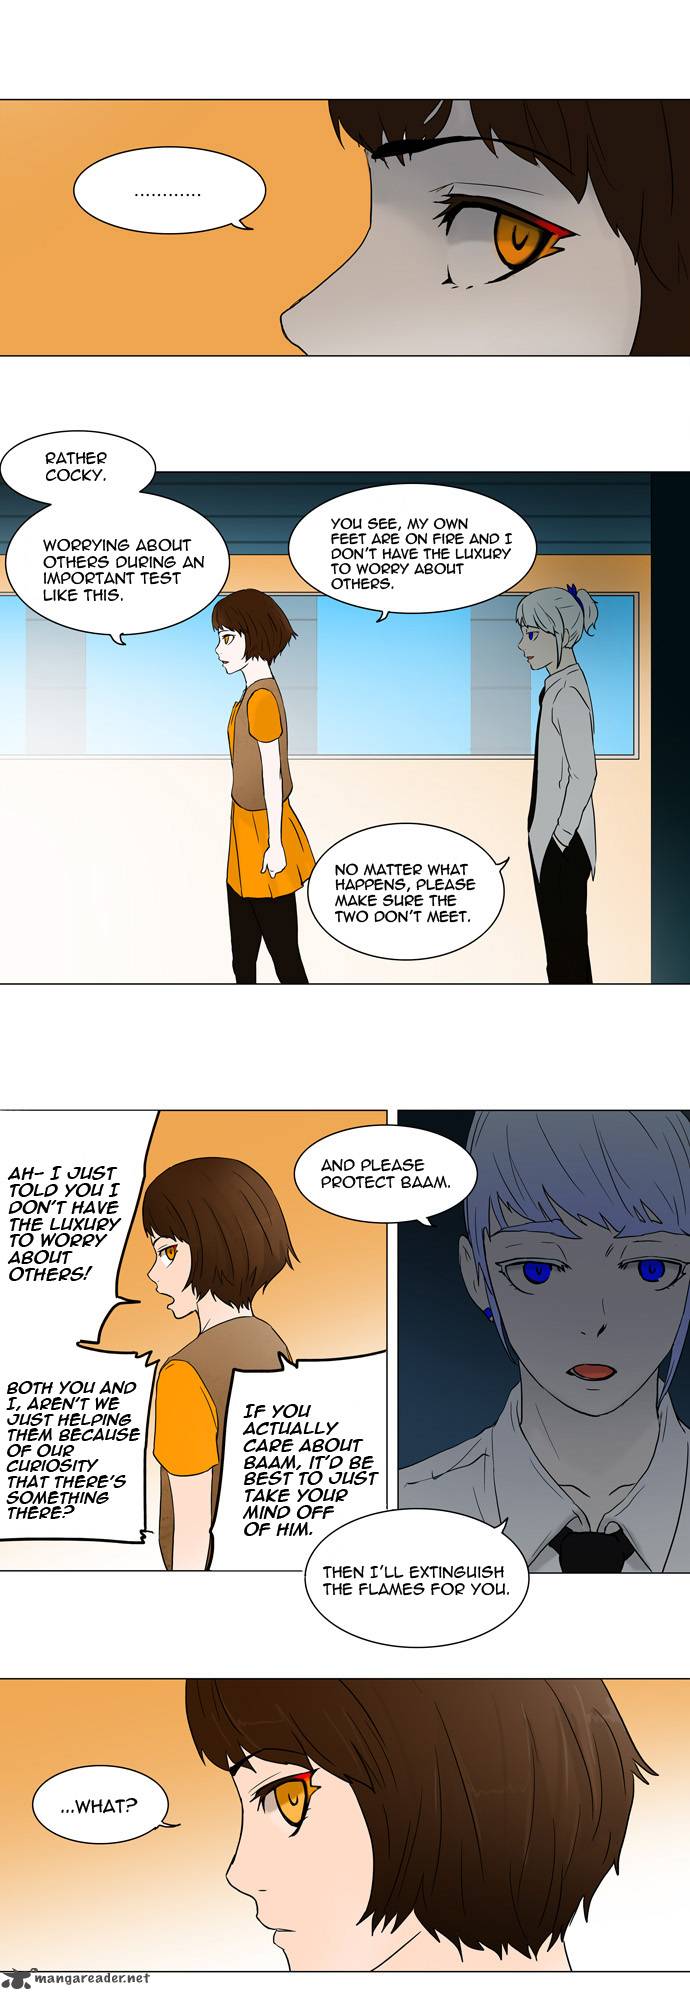 Tower Of God 55 21